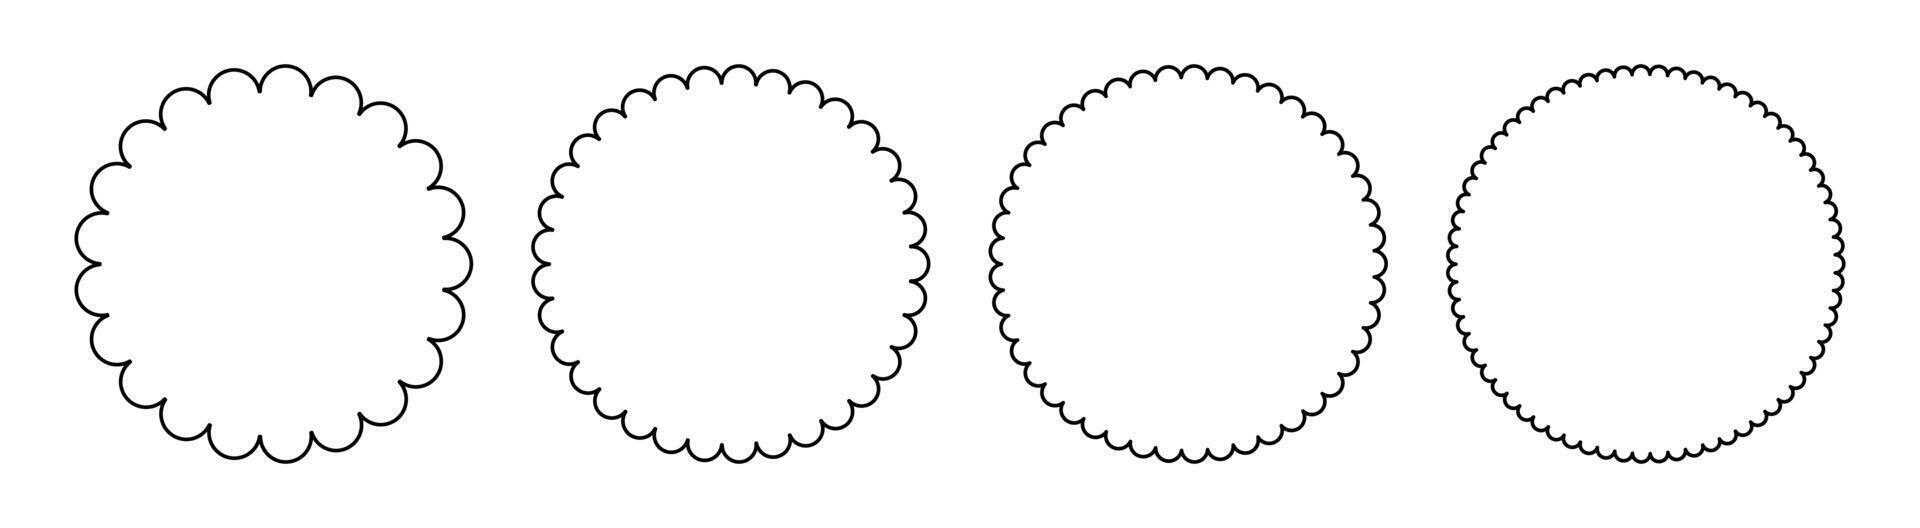 Scallop frames are round. Outline of circle different sized lace edges of element borders. Design vector collection isolated on white background.